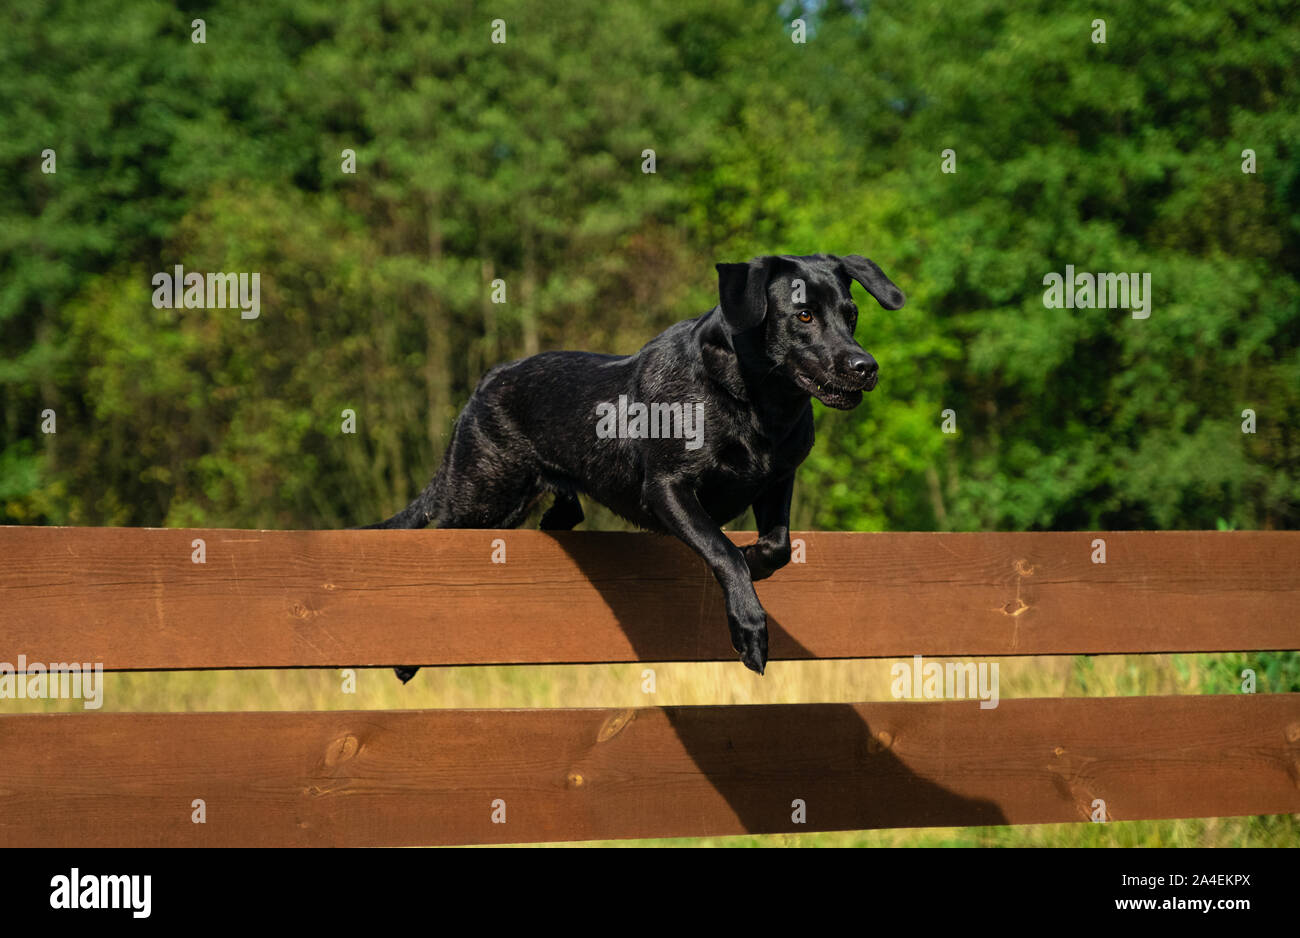 Black Labrador Retriever jumping over a wooden obstacle Stock Photo